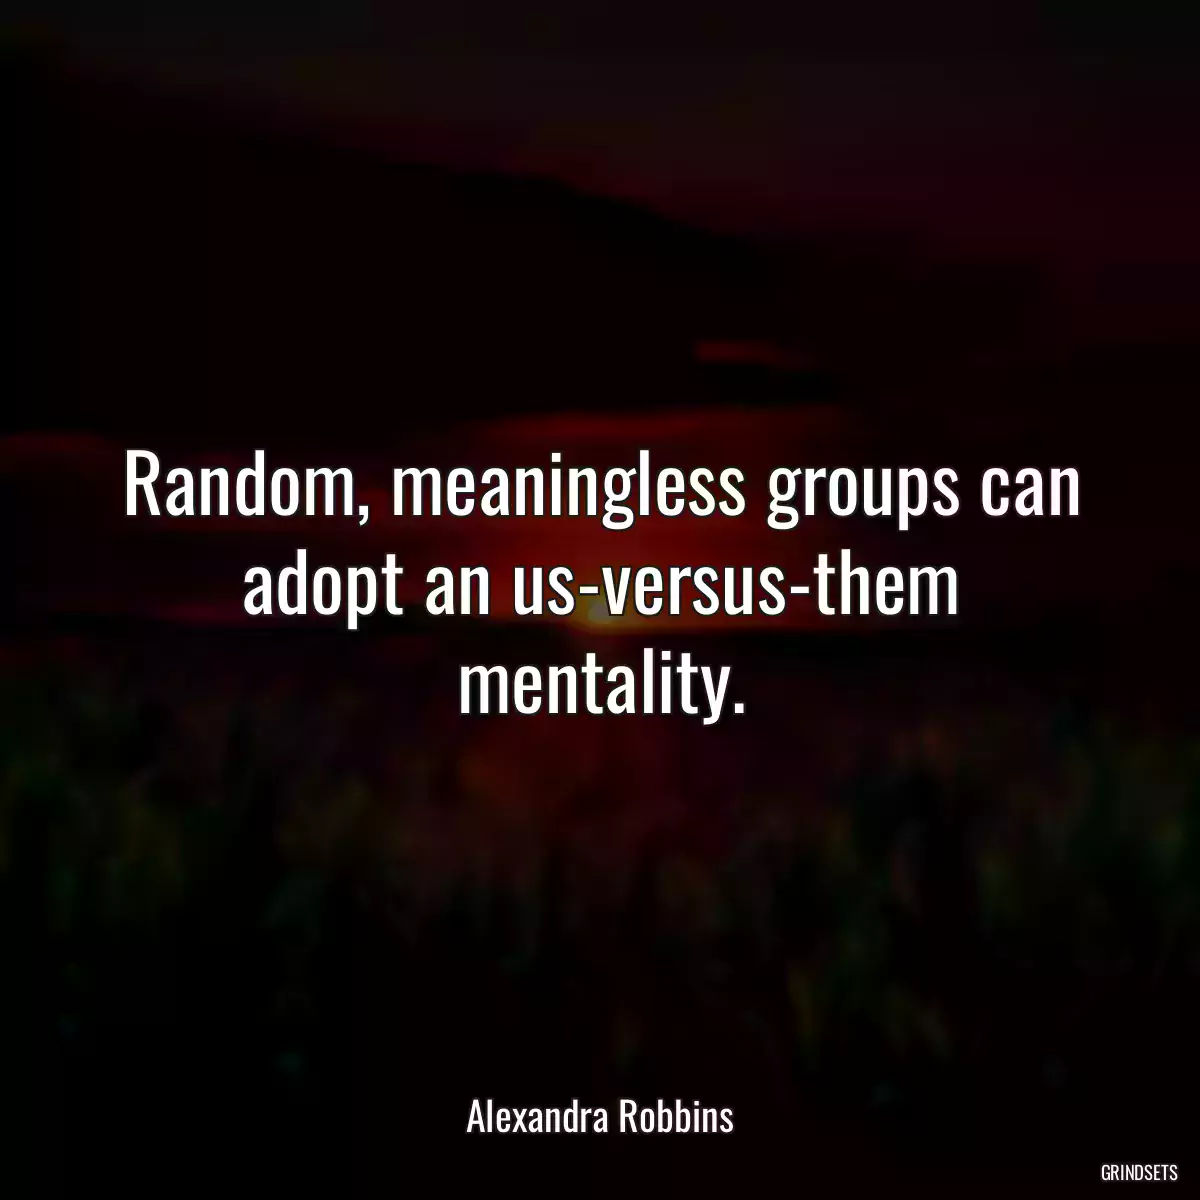 Random, meaningless groups can adopt an us-versus-them mentality.